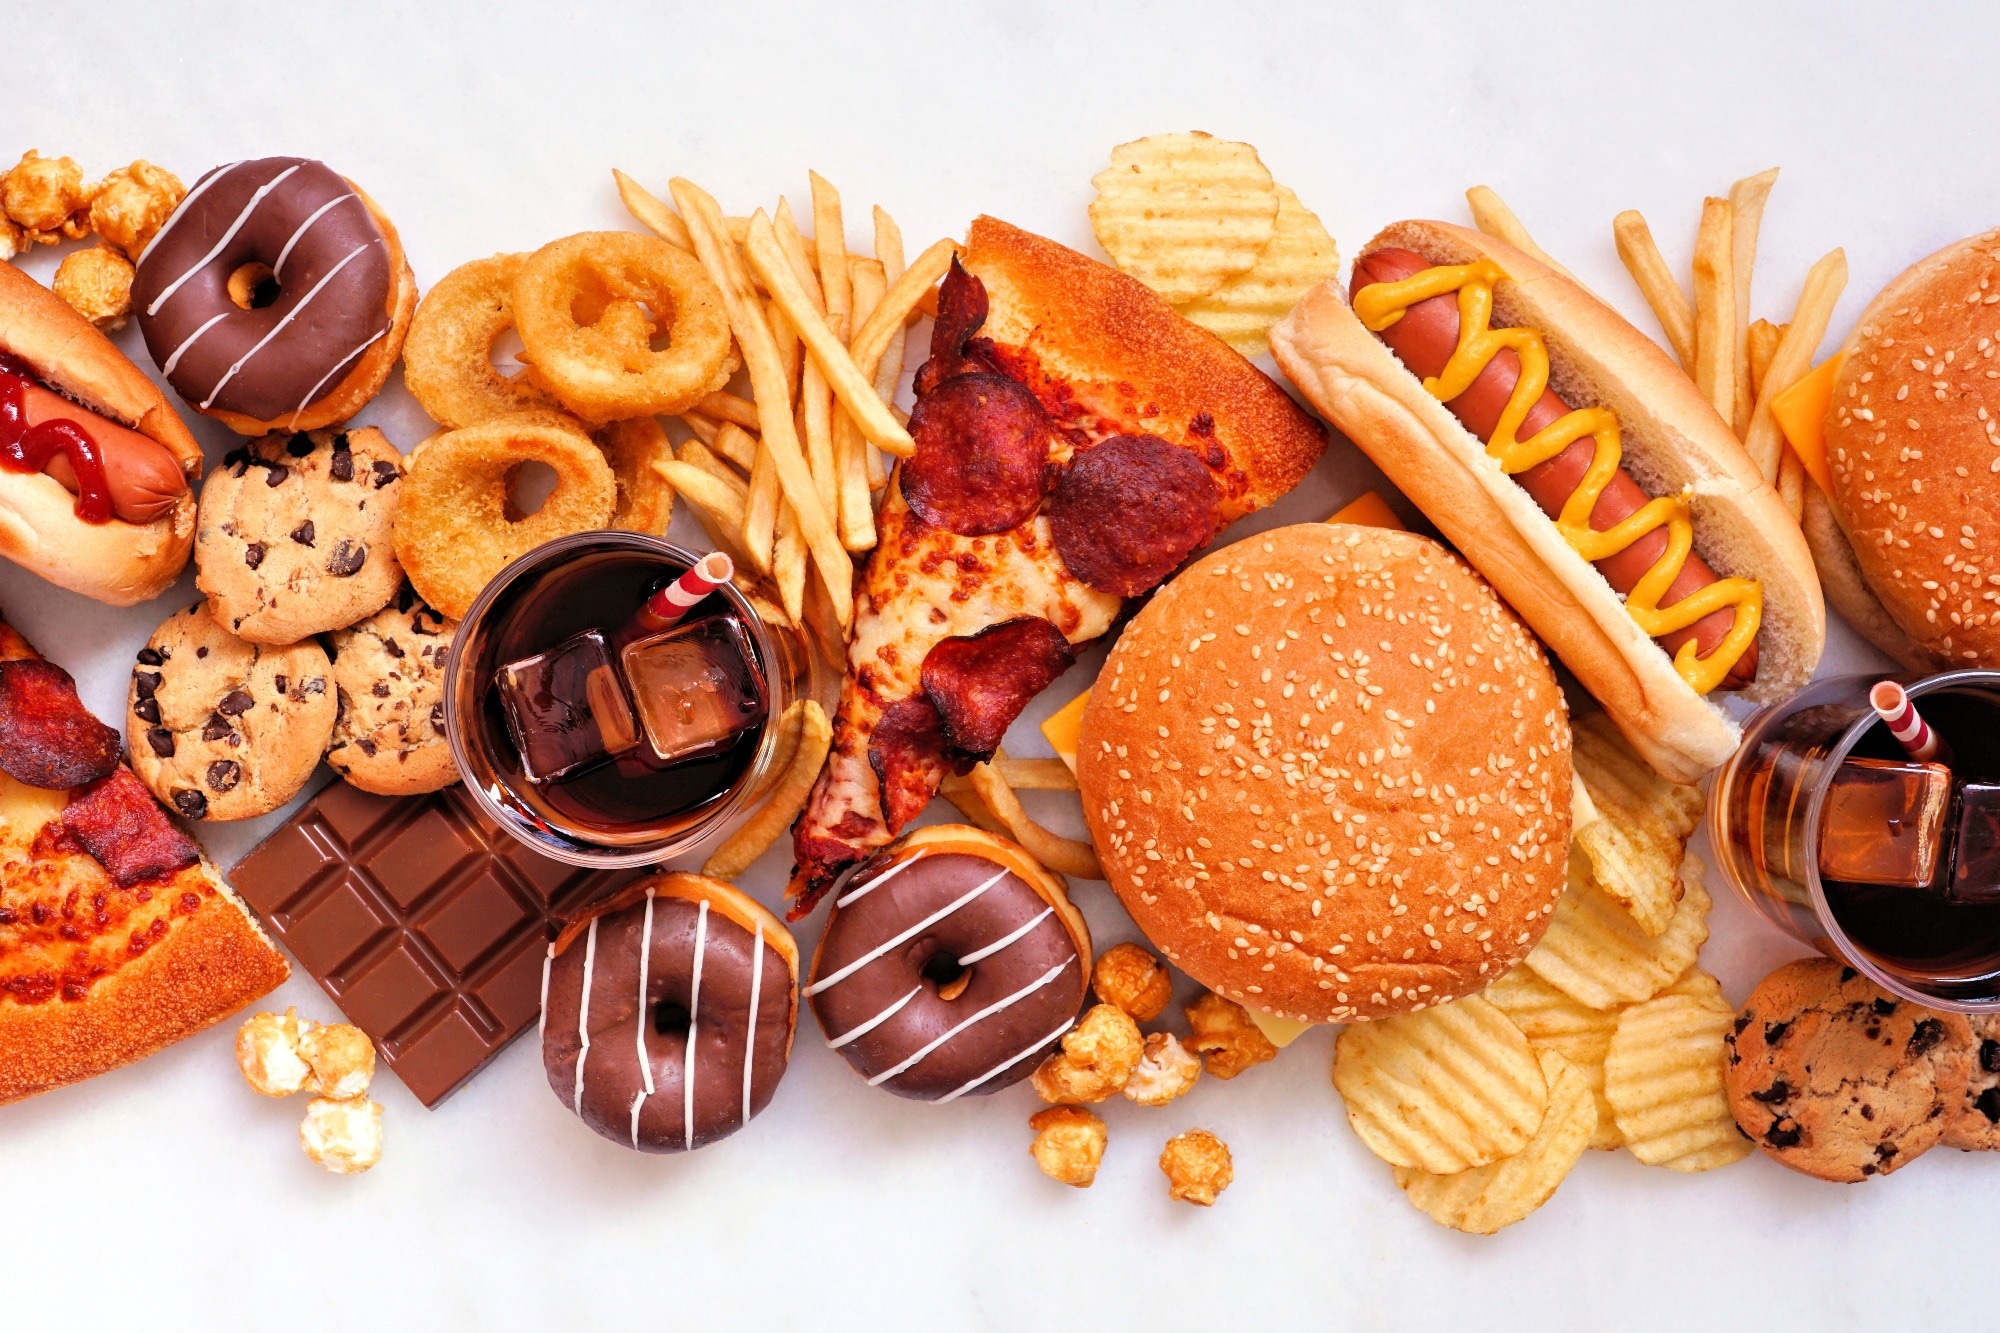 Study: Ultra-processed food consumption and metabolic disease risk: An umbrella review of systematic reviews with meta-analyses of observational studies. Image Credit: JeniFoto / Shutterstock.com